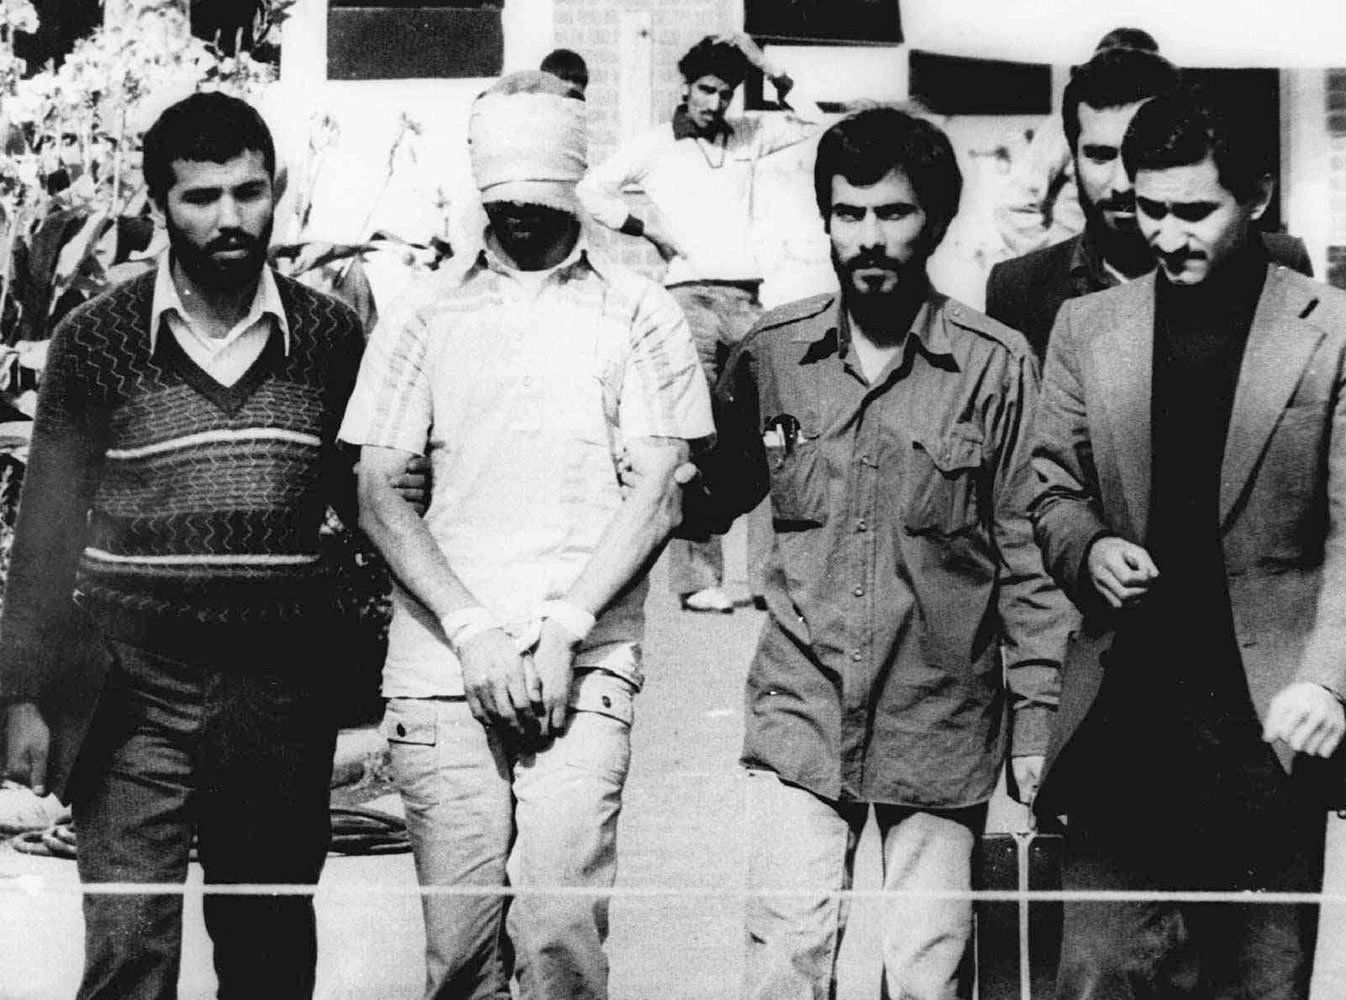 One of the hostages being held at the U.S. Embassy in Tehran is displayed to the crowd, blindfolded and with his hands bound, outside the embassy Nov. 9, 1979.